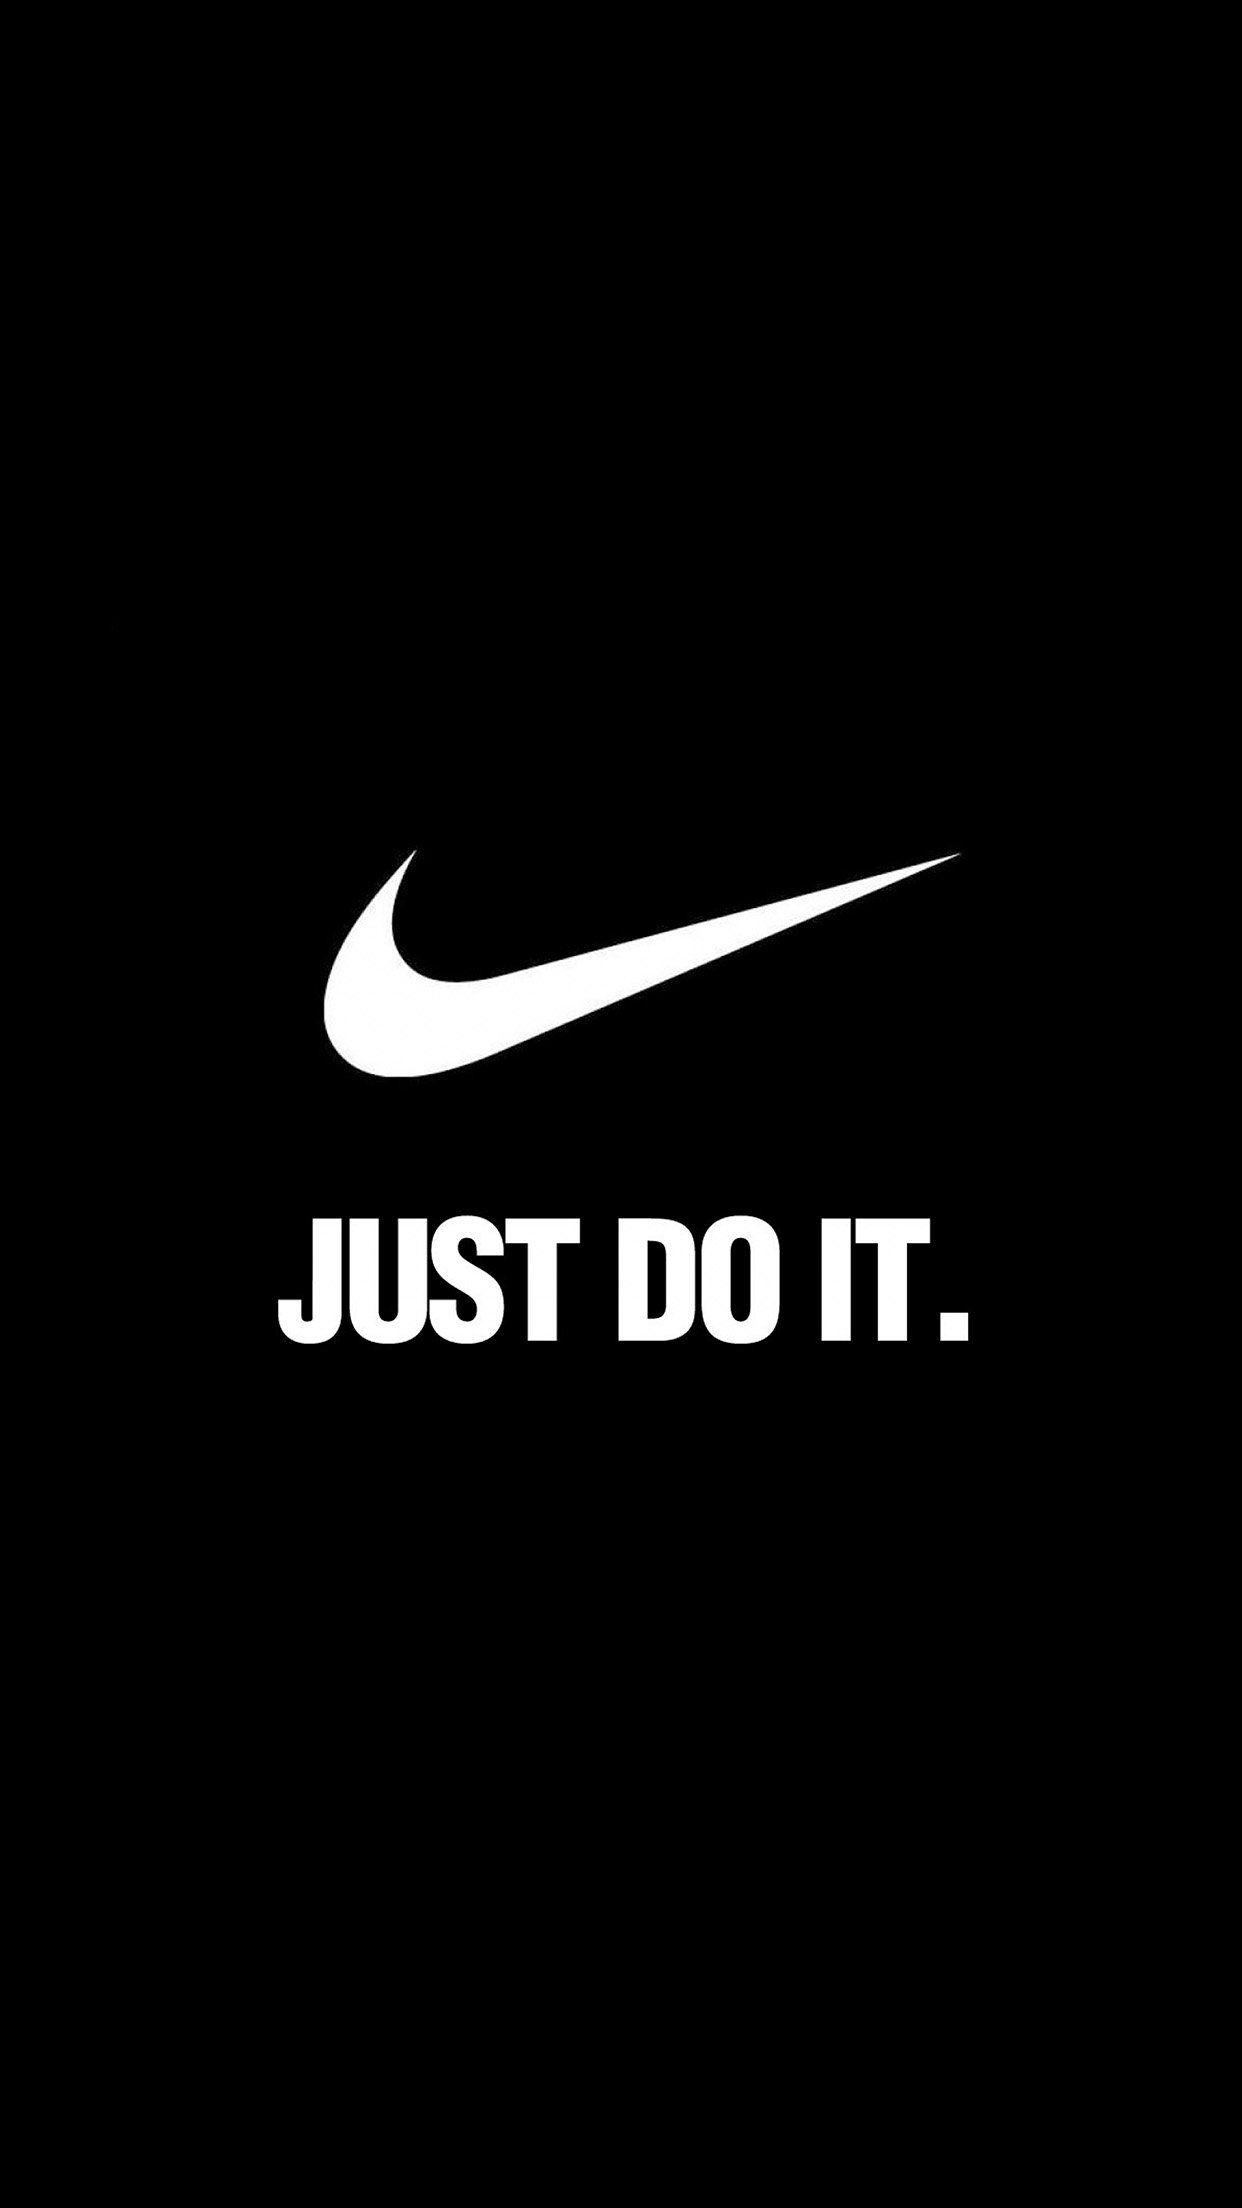 nike motivational backgrounds for iphone 5